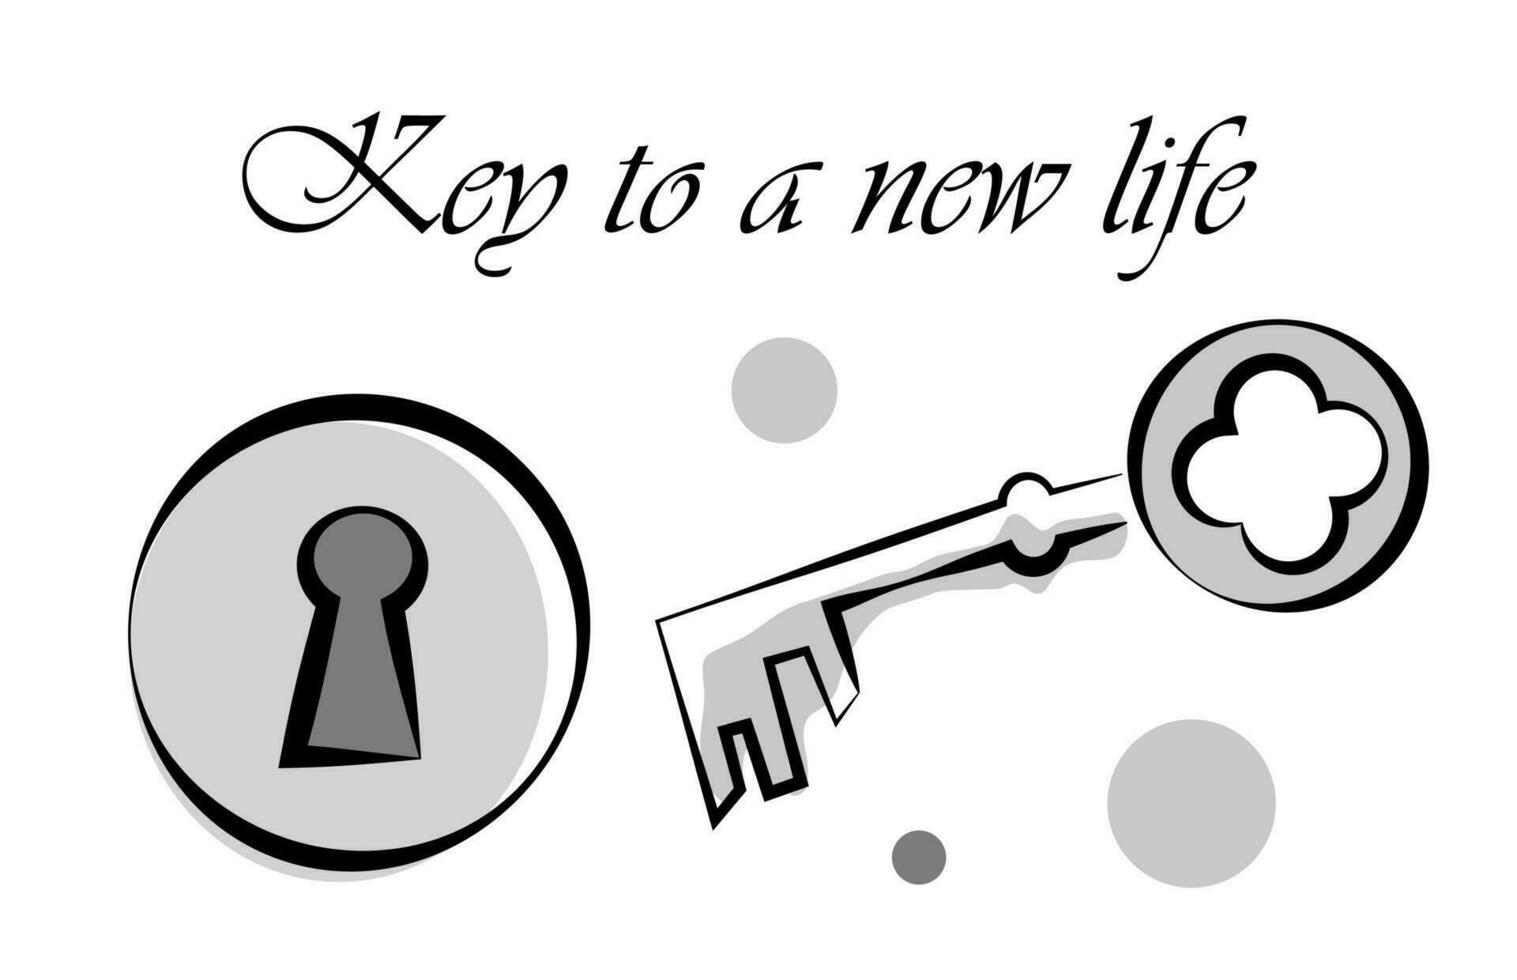 Keys to a new life vector